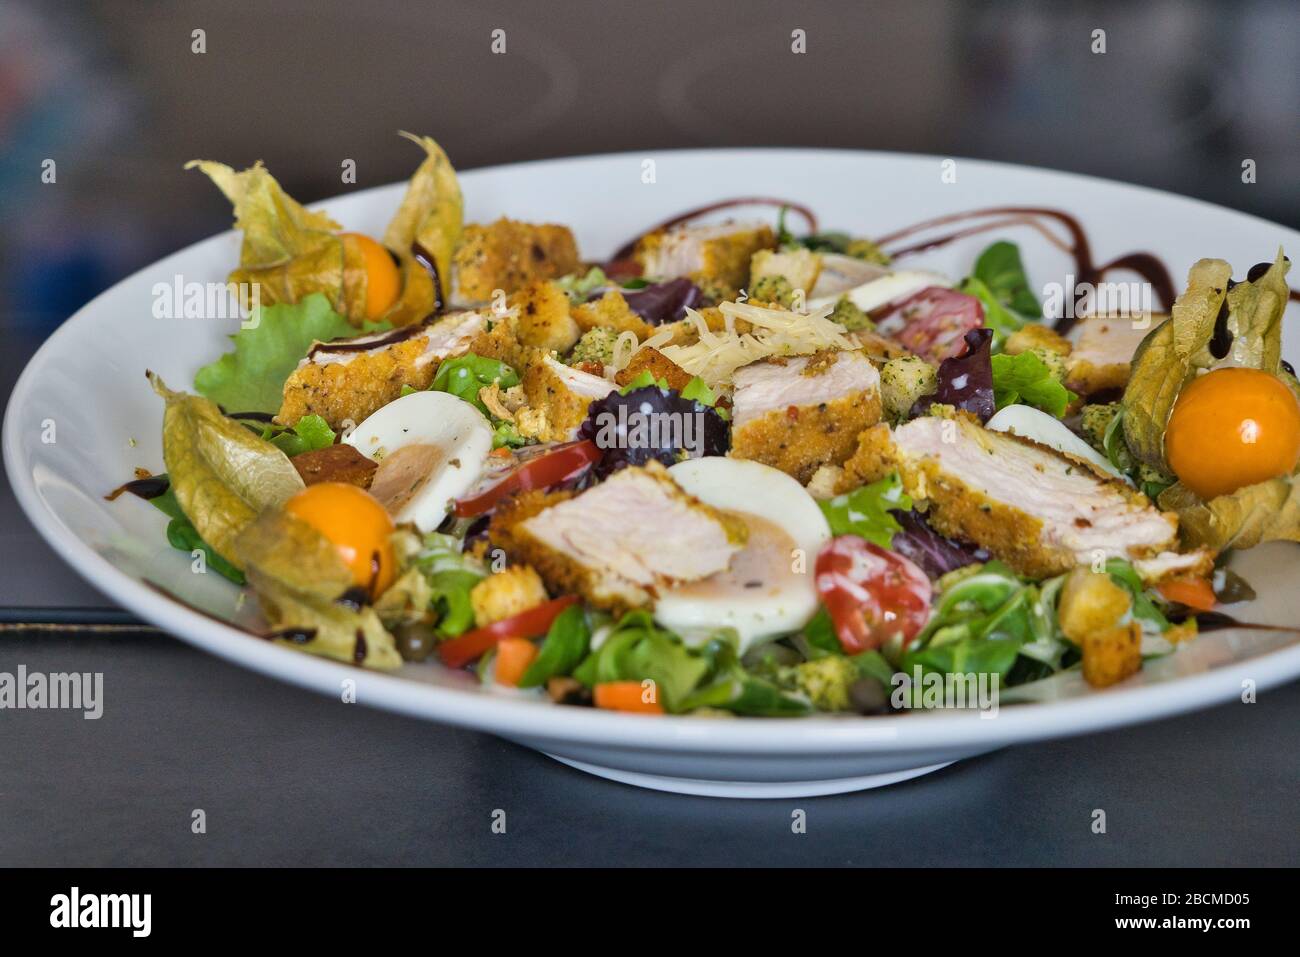 Mixed organic salad plate with chicken strips, tomatoes, eggs, bell pepper, field salad, balsamic vinegar and croutons, product image Stock Photo